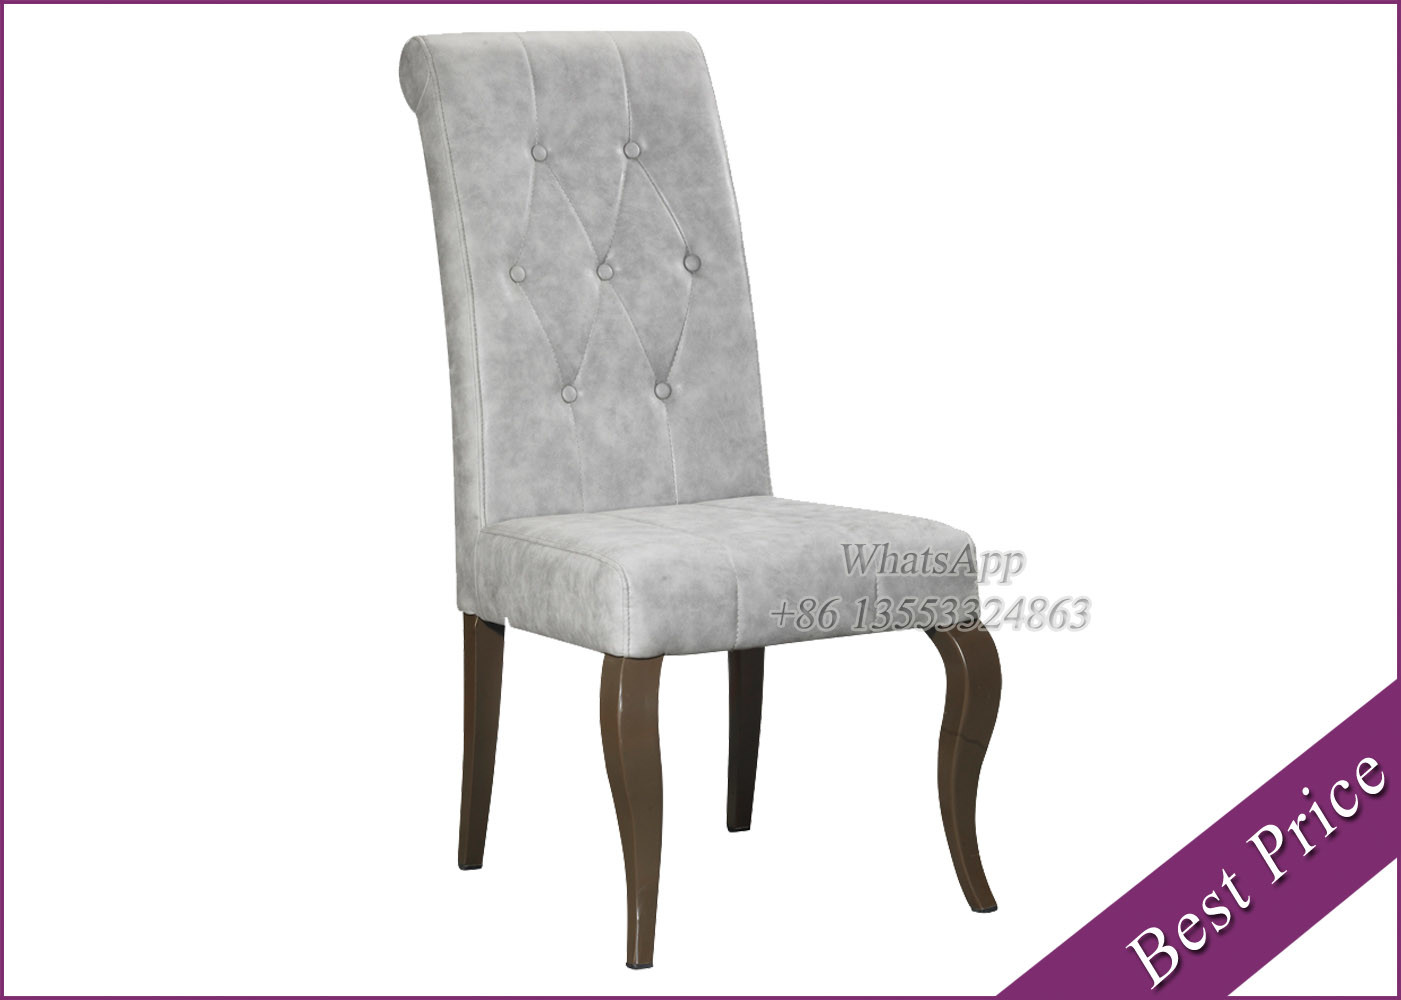 Chinese Furniture Factory Leather High Back Dining Chair (YA-32)